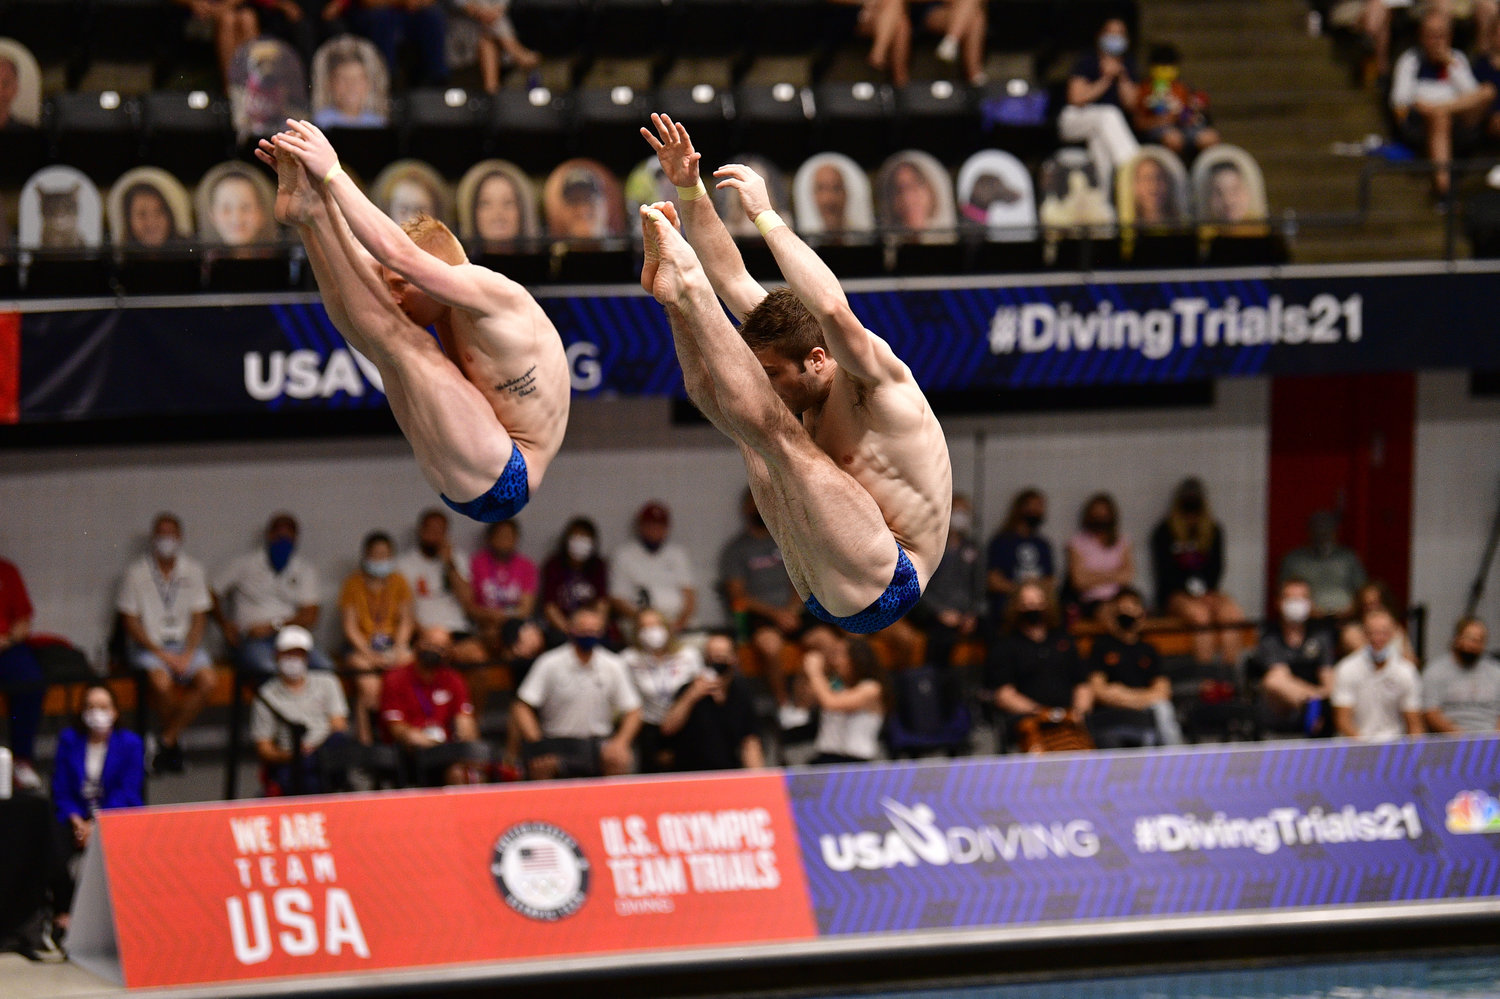 Andrew Capobianco, left, and partner Michael Hixon at the Olympic trials in Indianapolis. The duo scored a silver medal in the men’s Synchronized 3m Springboard Final at the Tokyo Olympics.